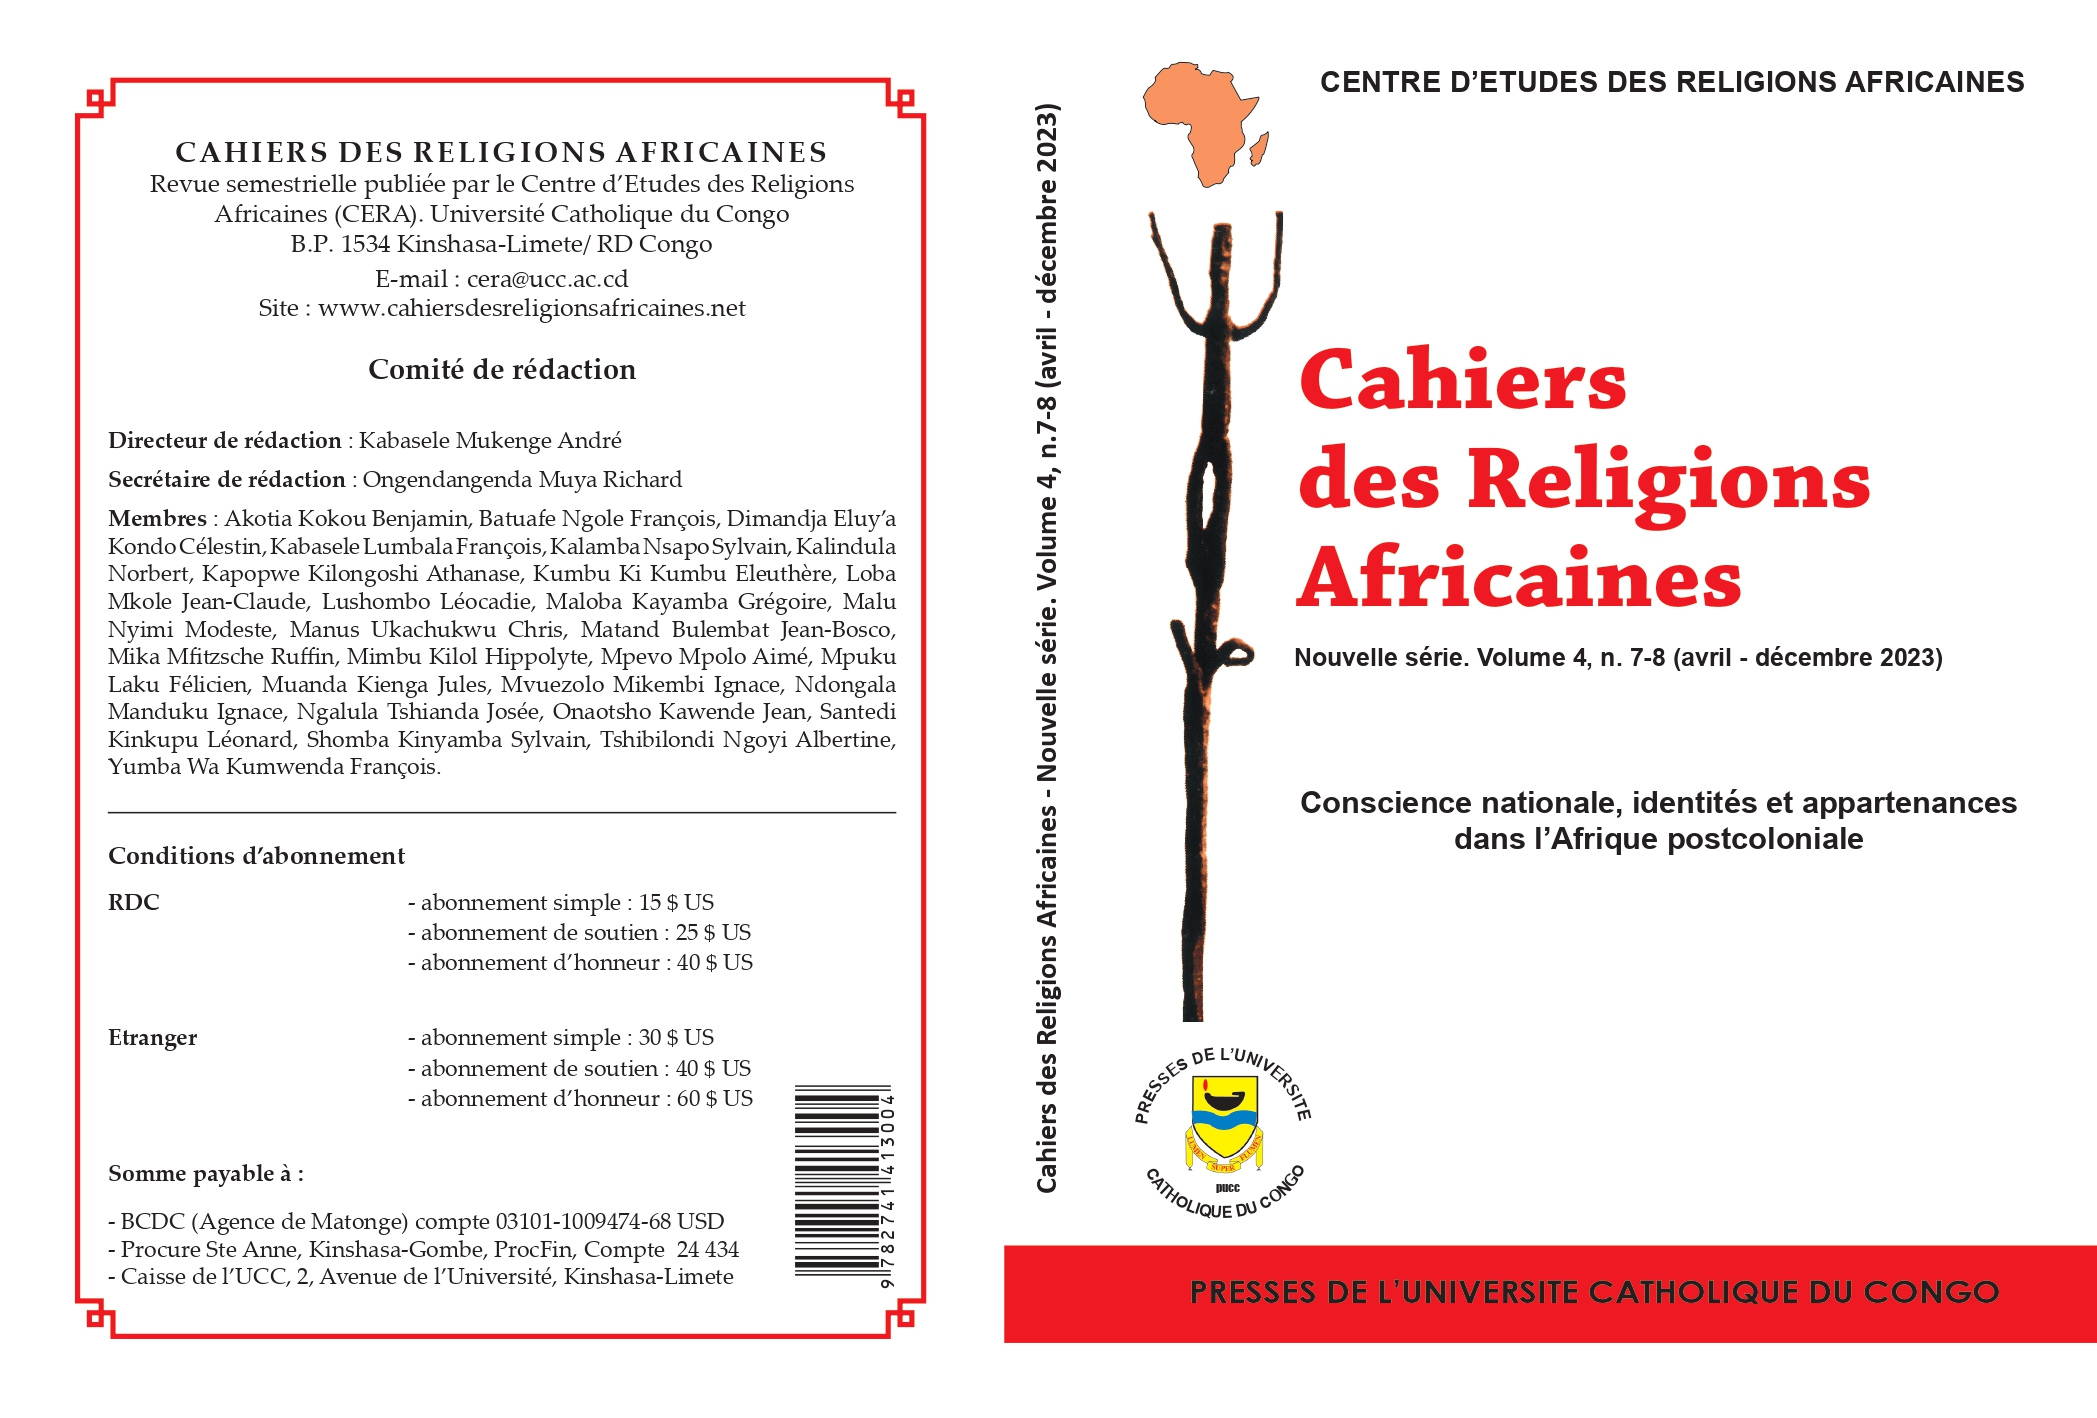 Cahiers des Religions Africaines